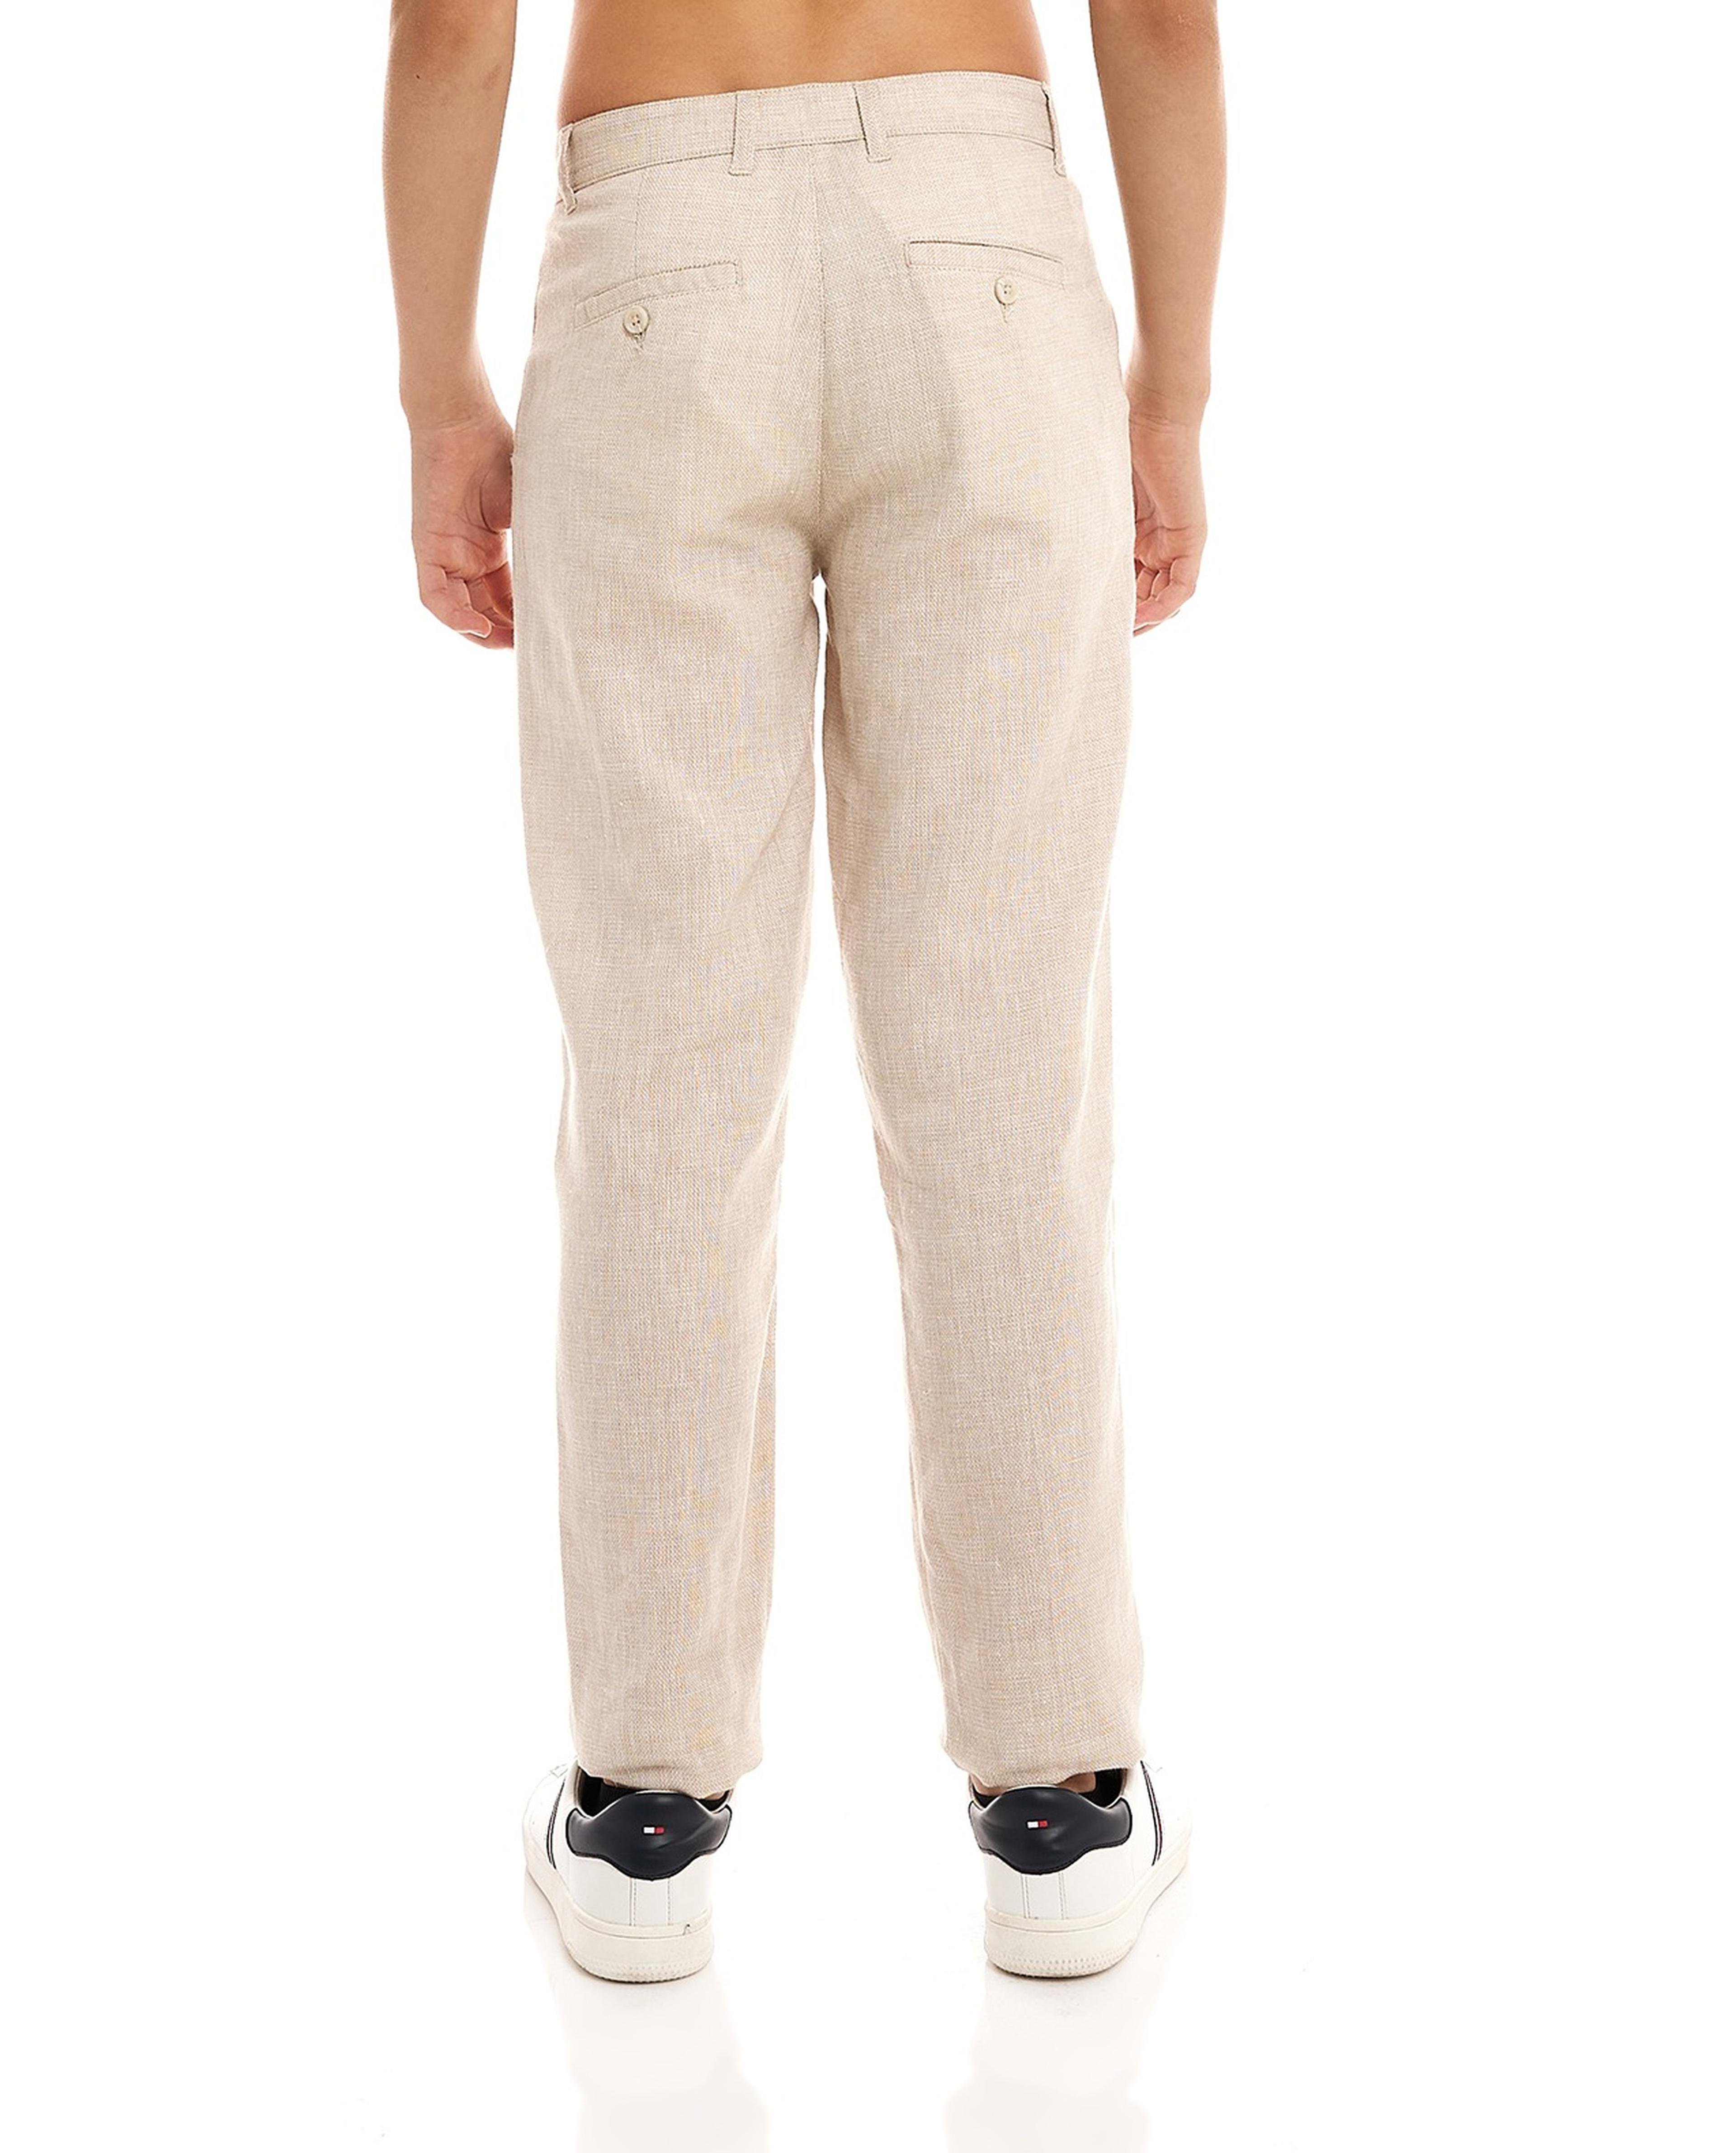 Woven Straight Fit Pants with Button Closure